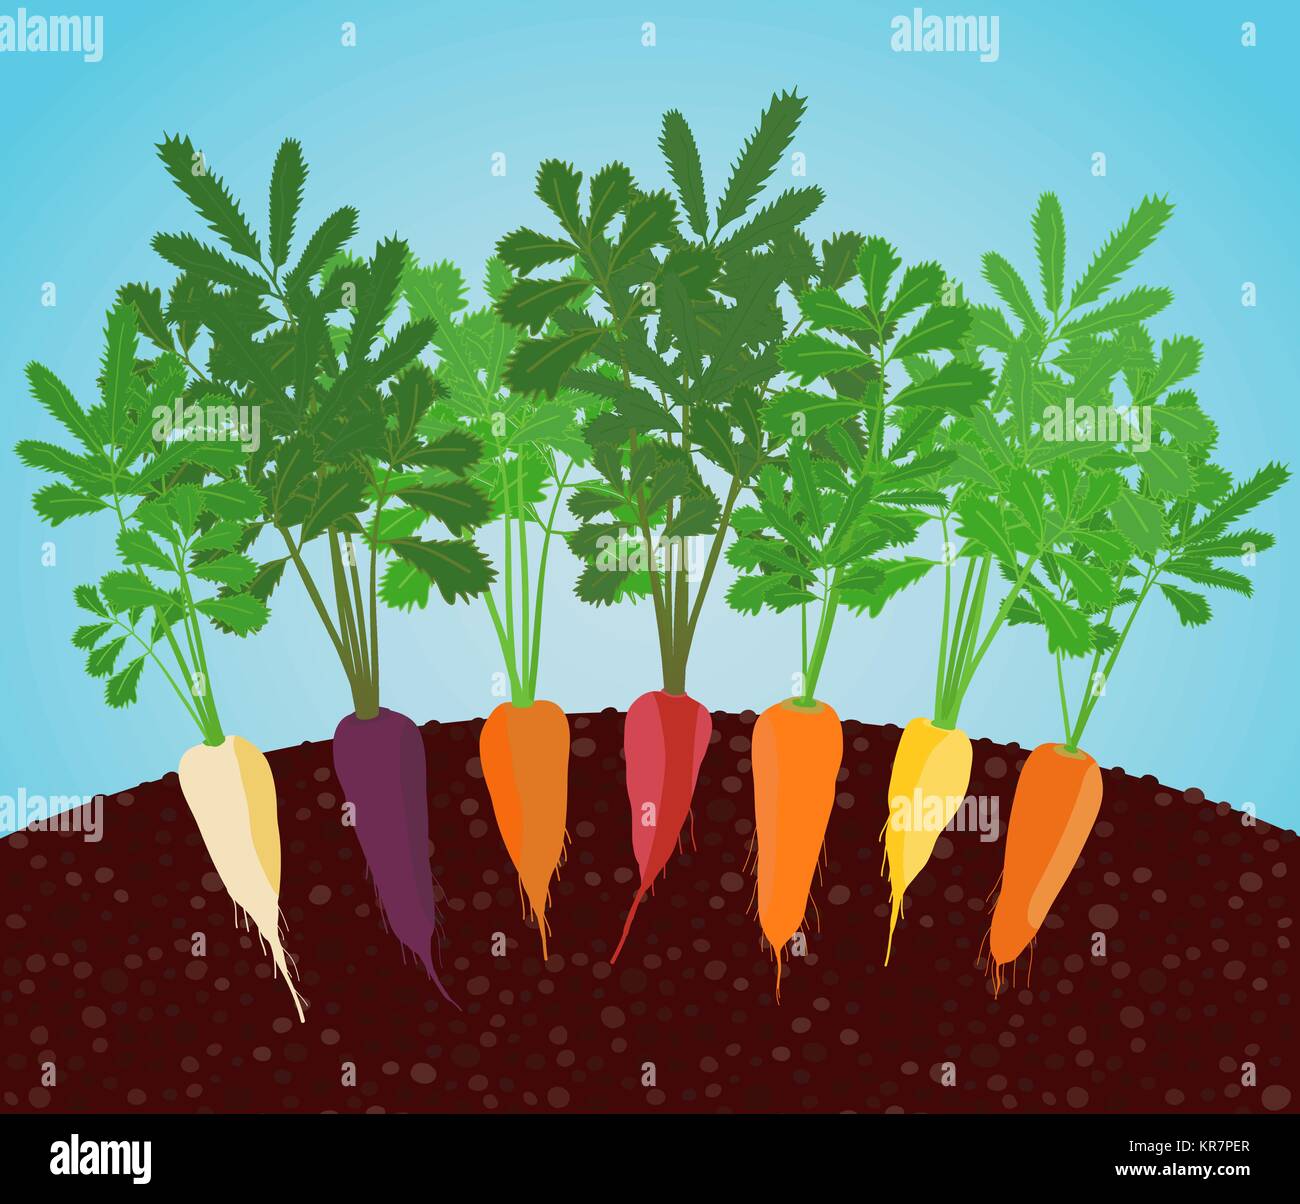 Rainbow Carrots Illustration. Growing vegetables in the soil. A garden bed of carrot. Classic orange, purple, dark red, white, and bright yellow varie Stock Vector